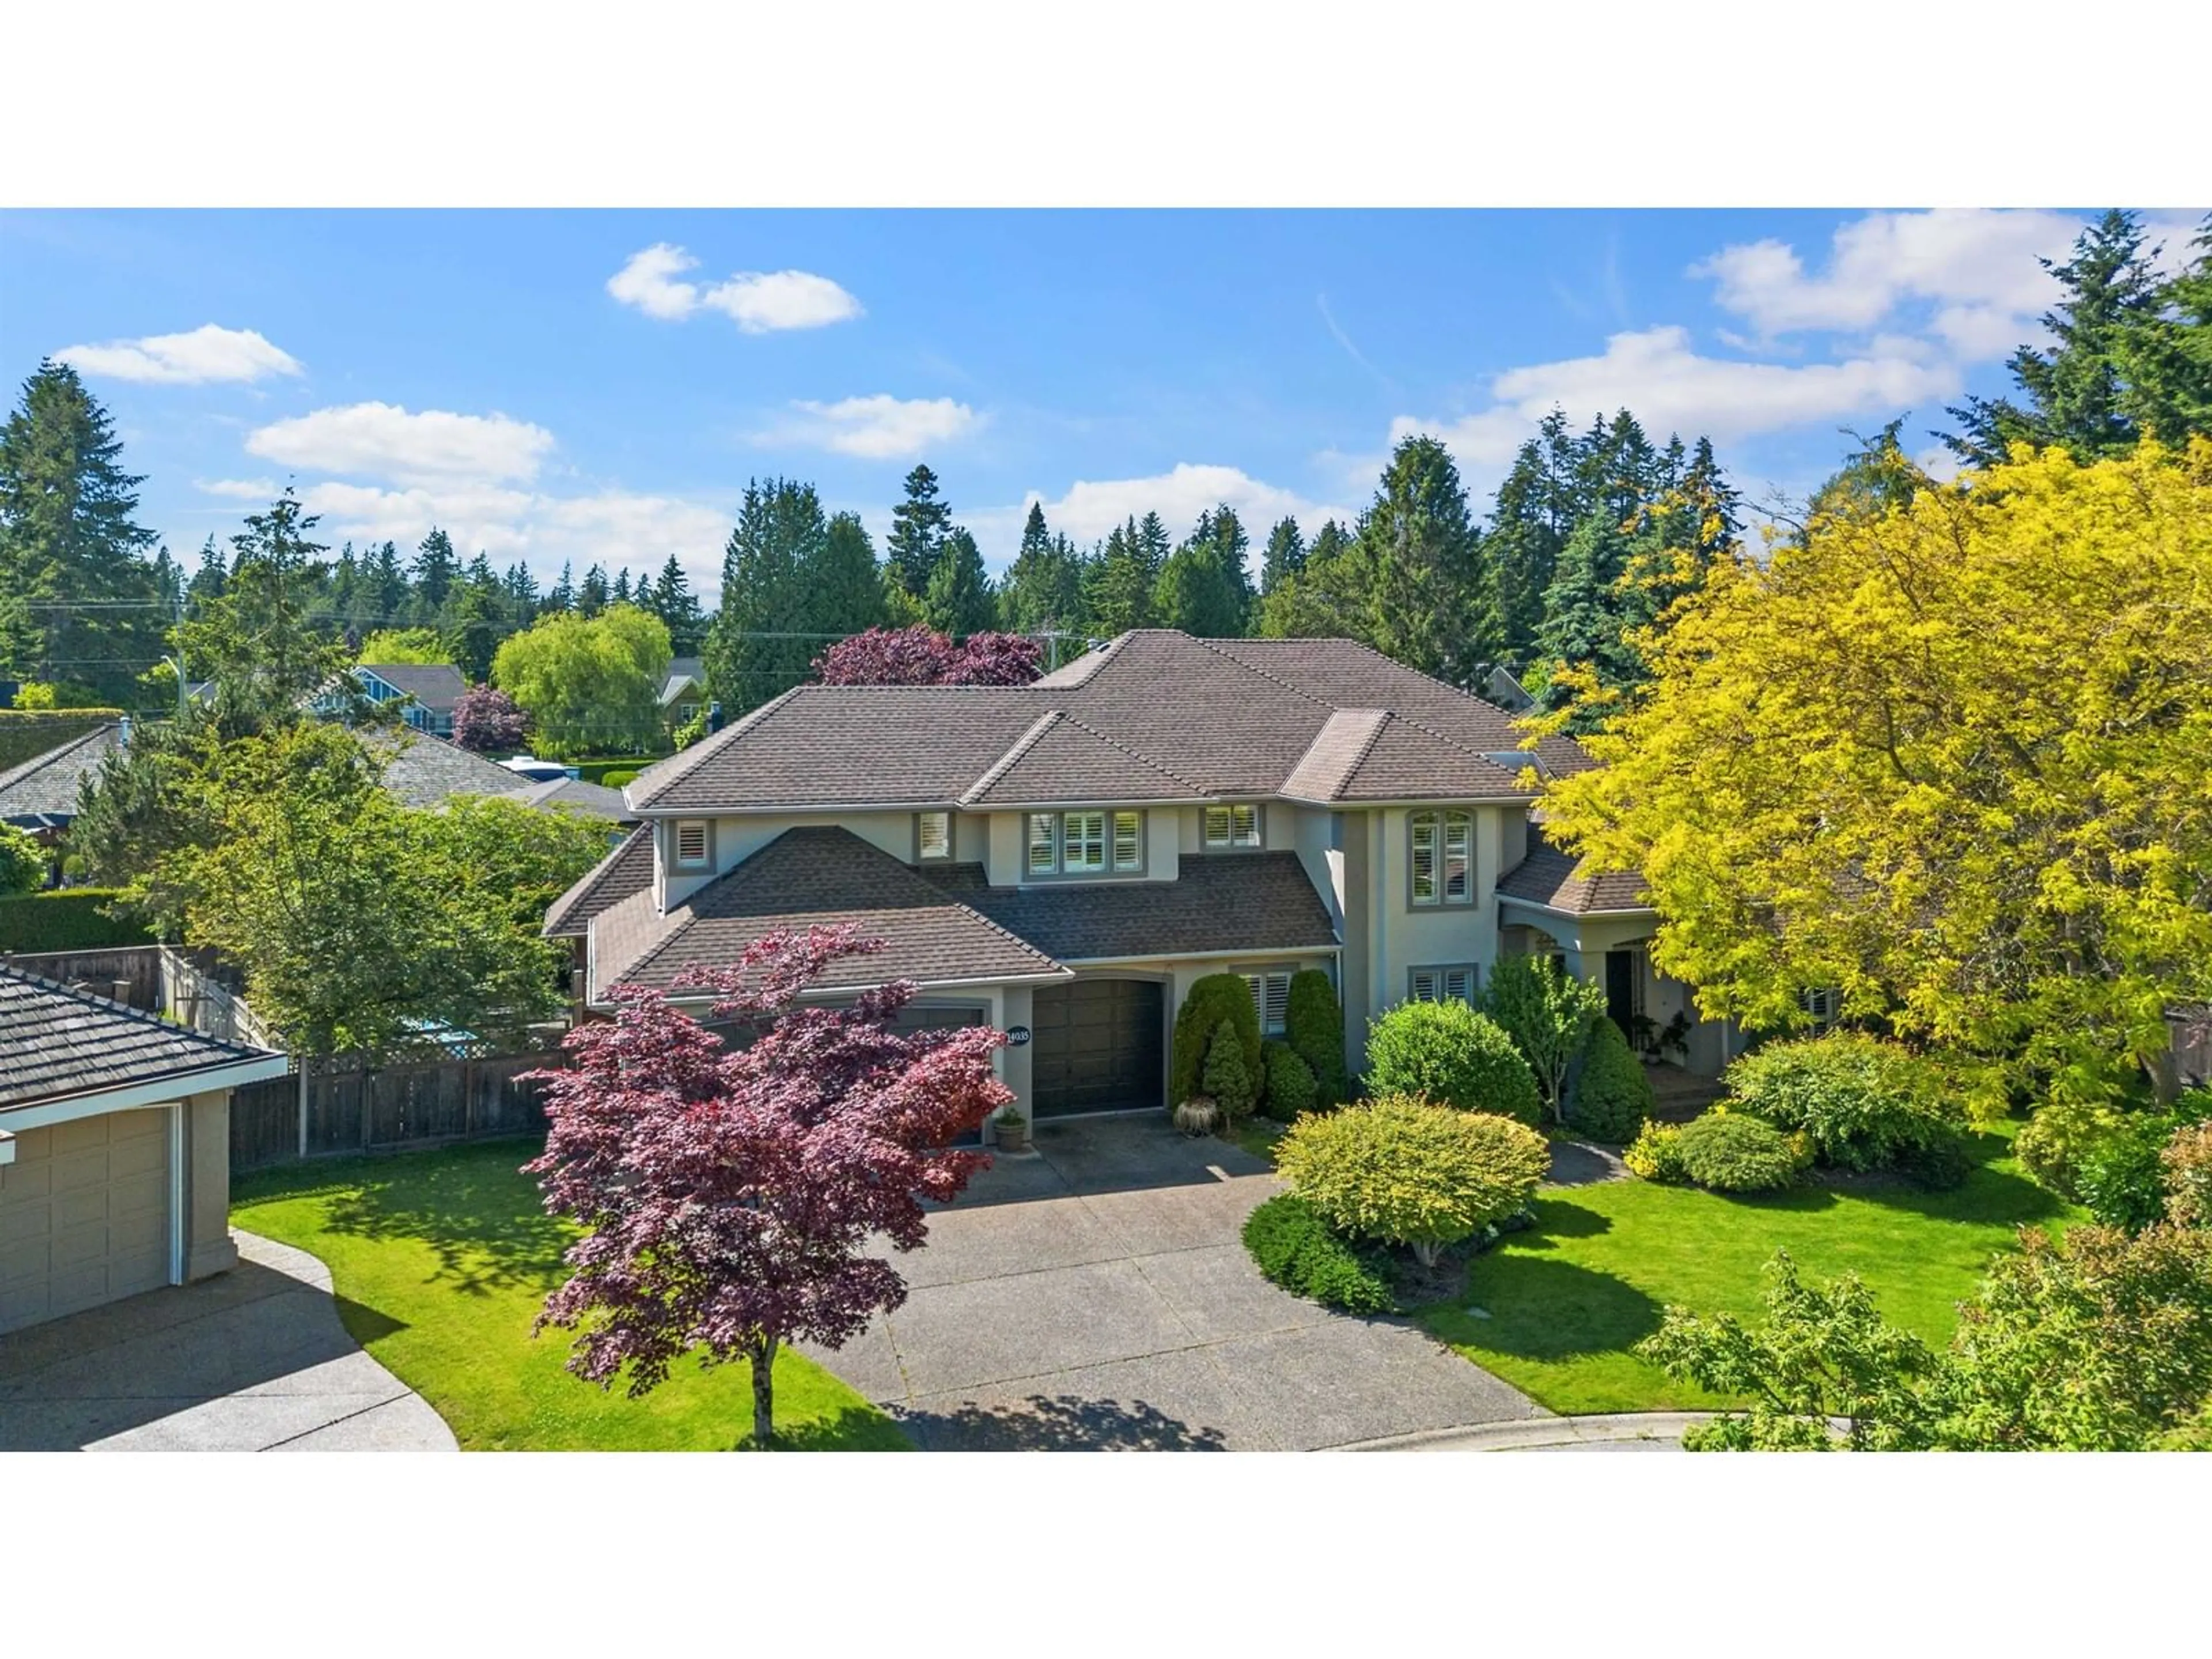 Frontside or backside of a home for 14035 29A AVENUE, Surrey British Columbia V4P2J8